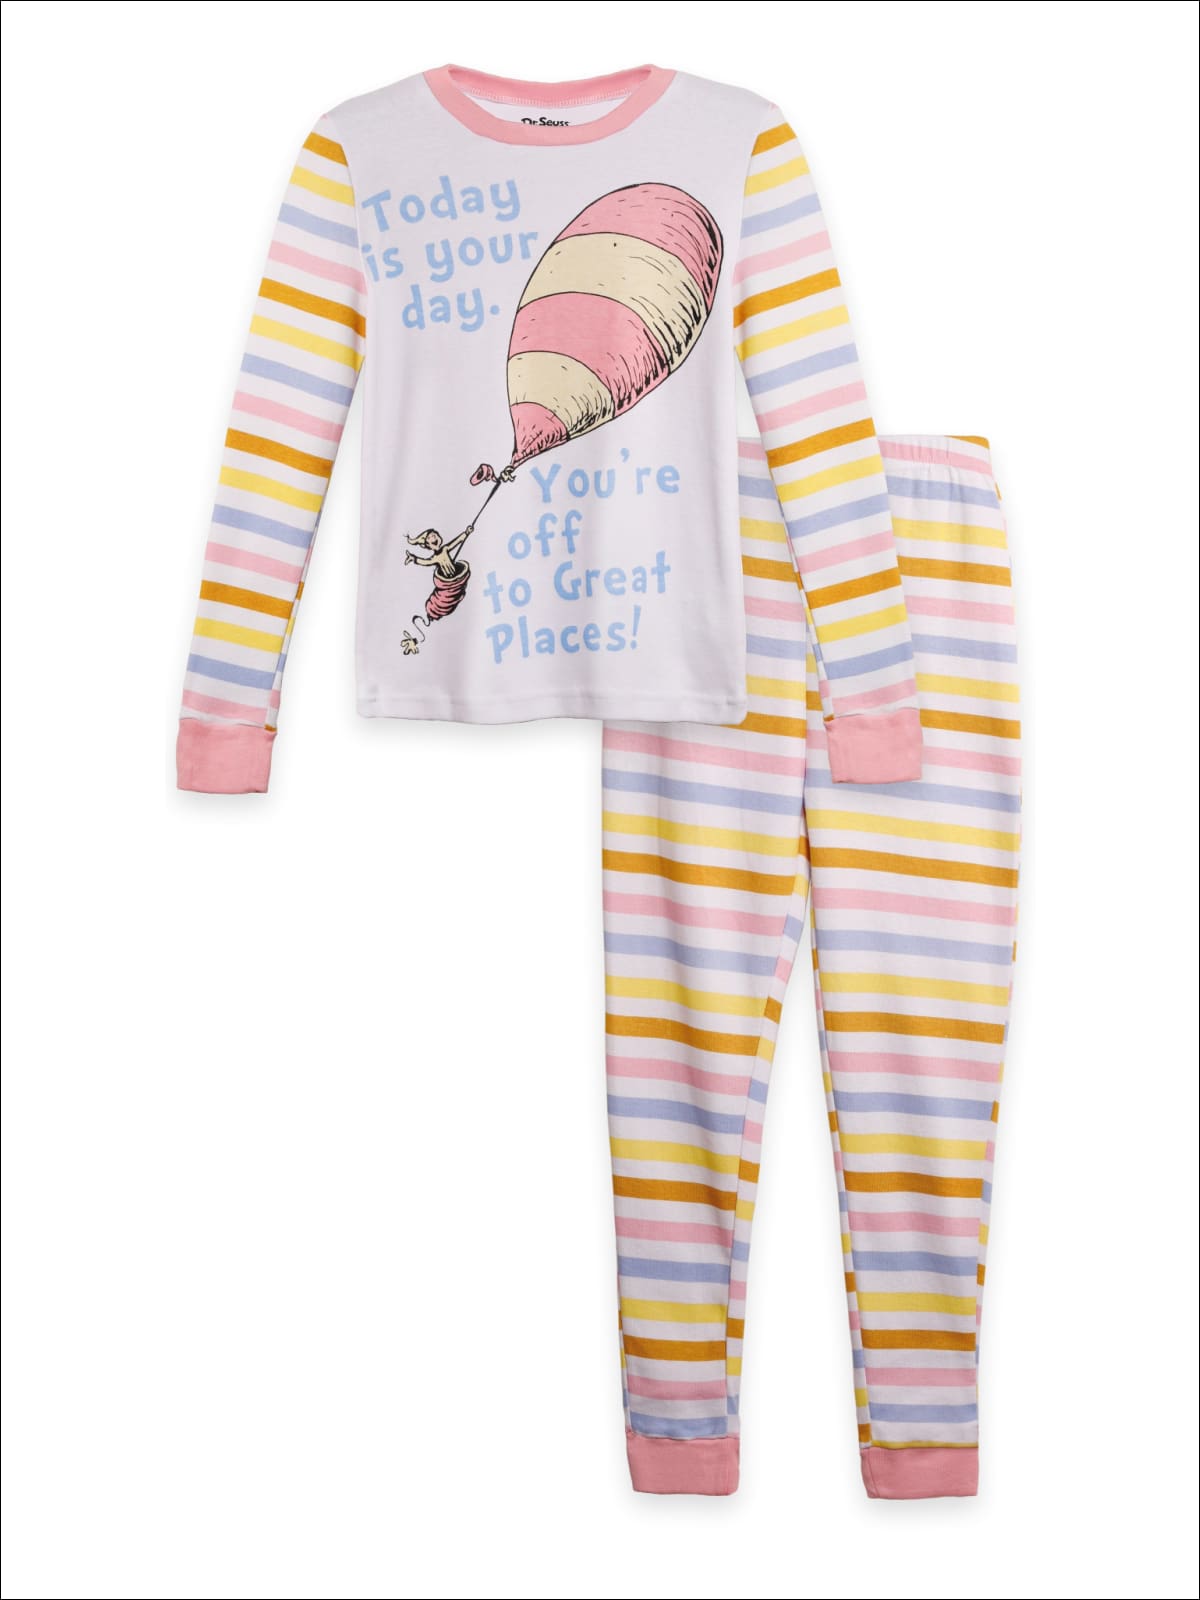 Dr Seuss Today is Your Day Girls Cotton Pajama Set